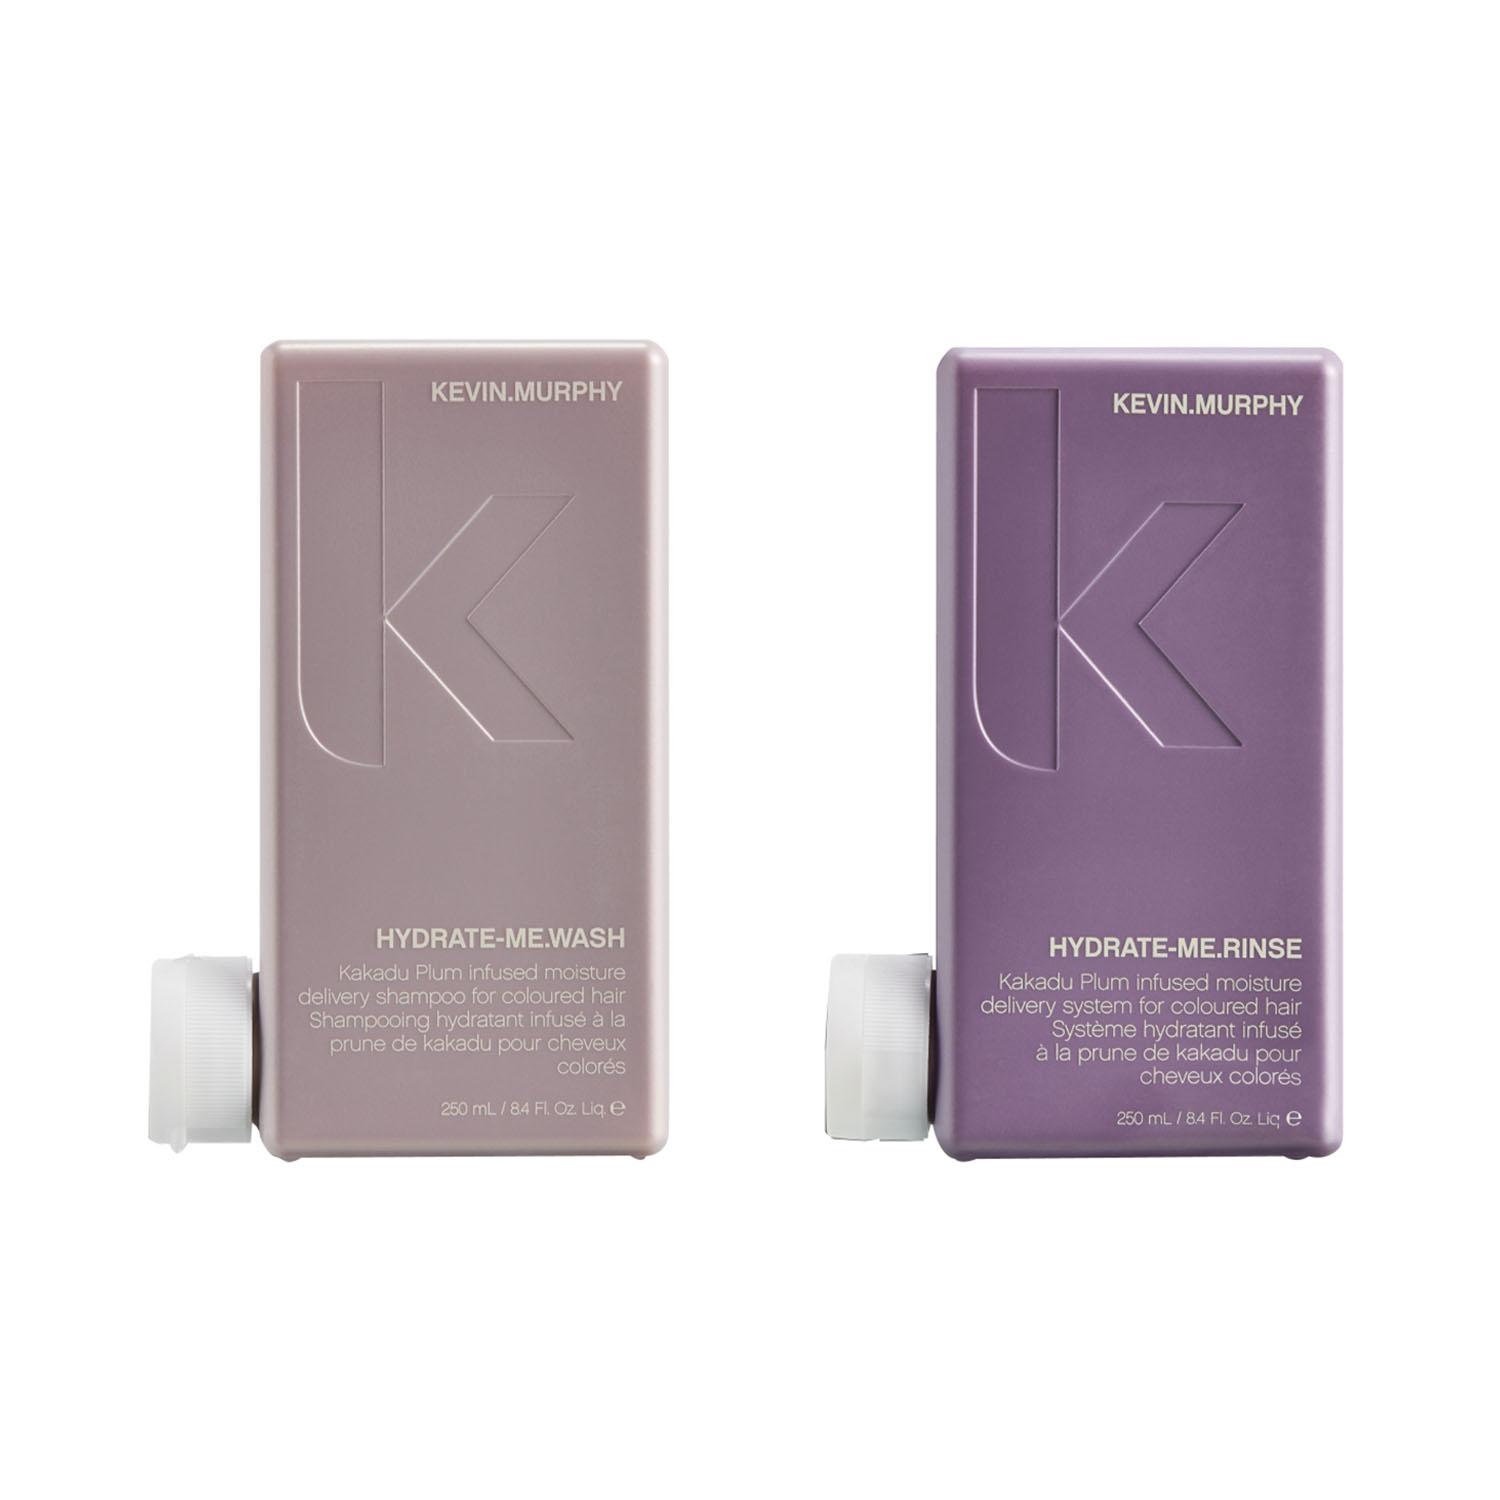 Trix of the Trade Now Sells KEVIN.MURPHY Products